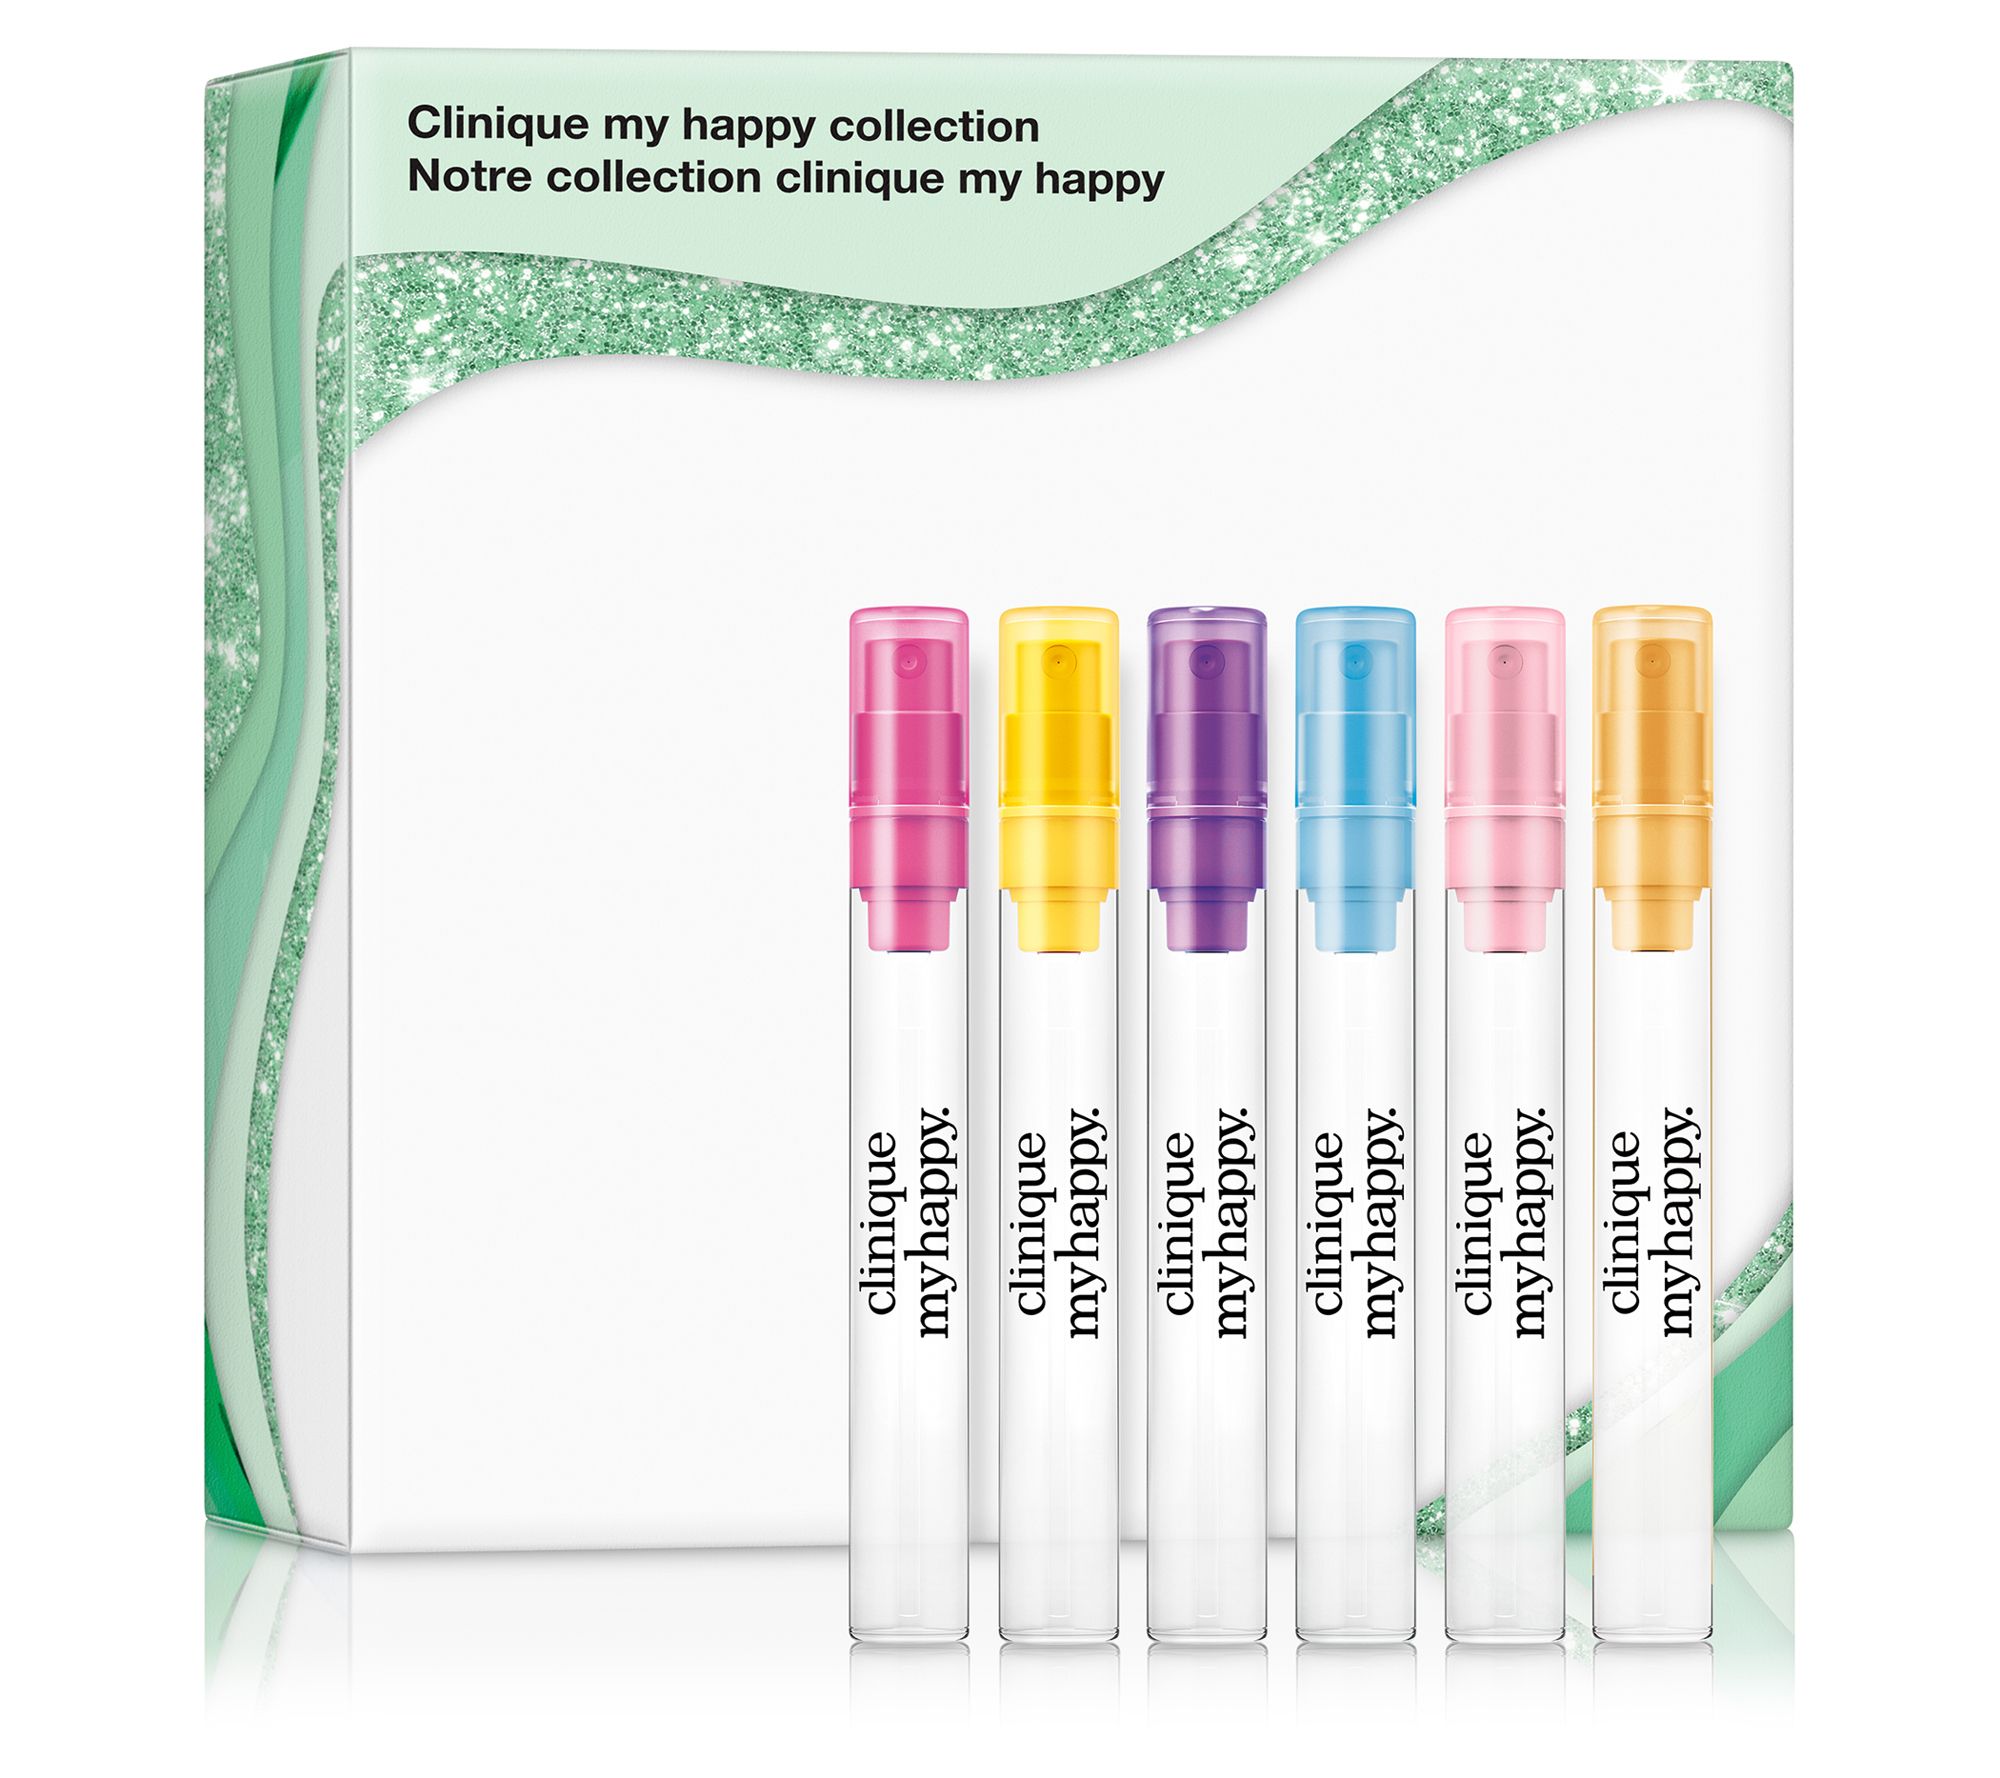 Clinique My Happy Fragrance Set 